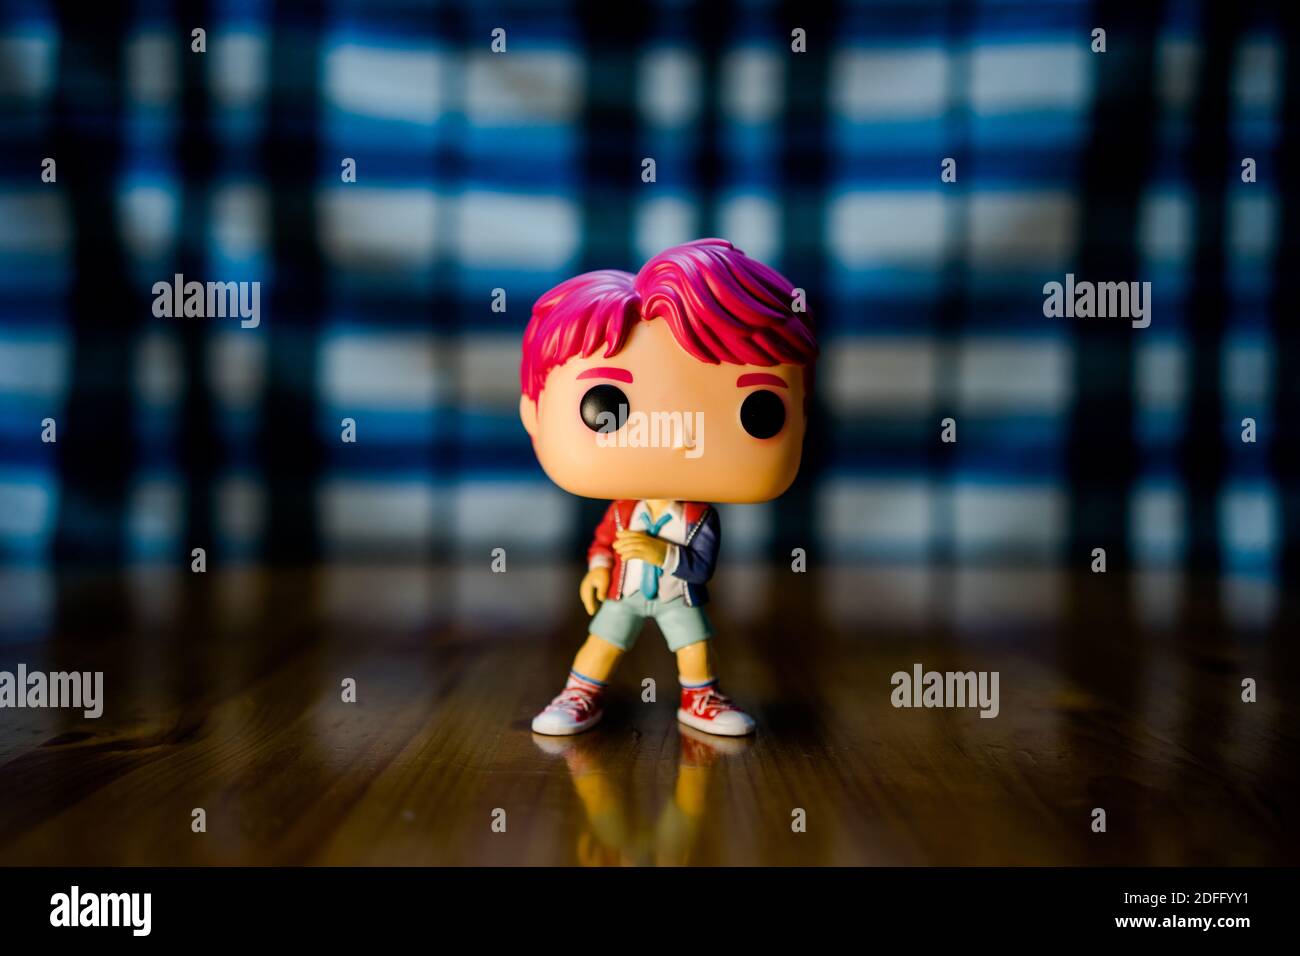 Gangnam, South Korea - March 01, 2020. BTS character figurine at the House of BTS Pop Up Store Stock Photo